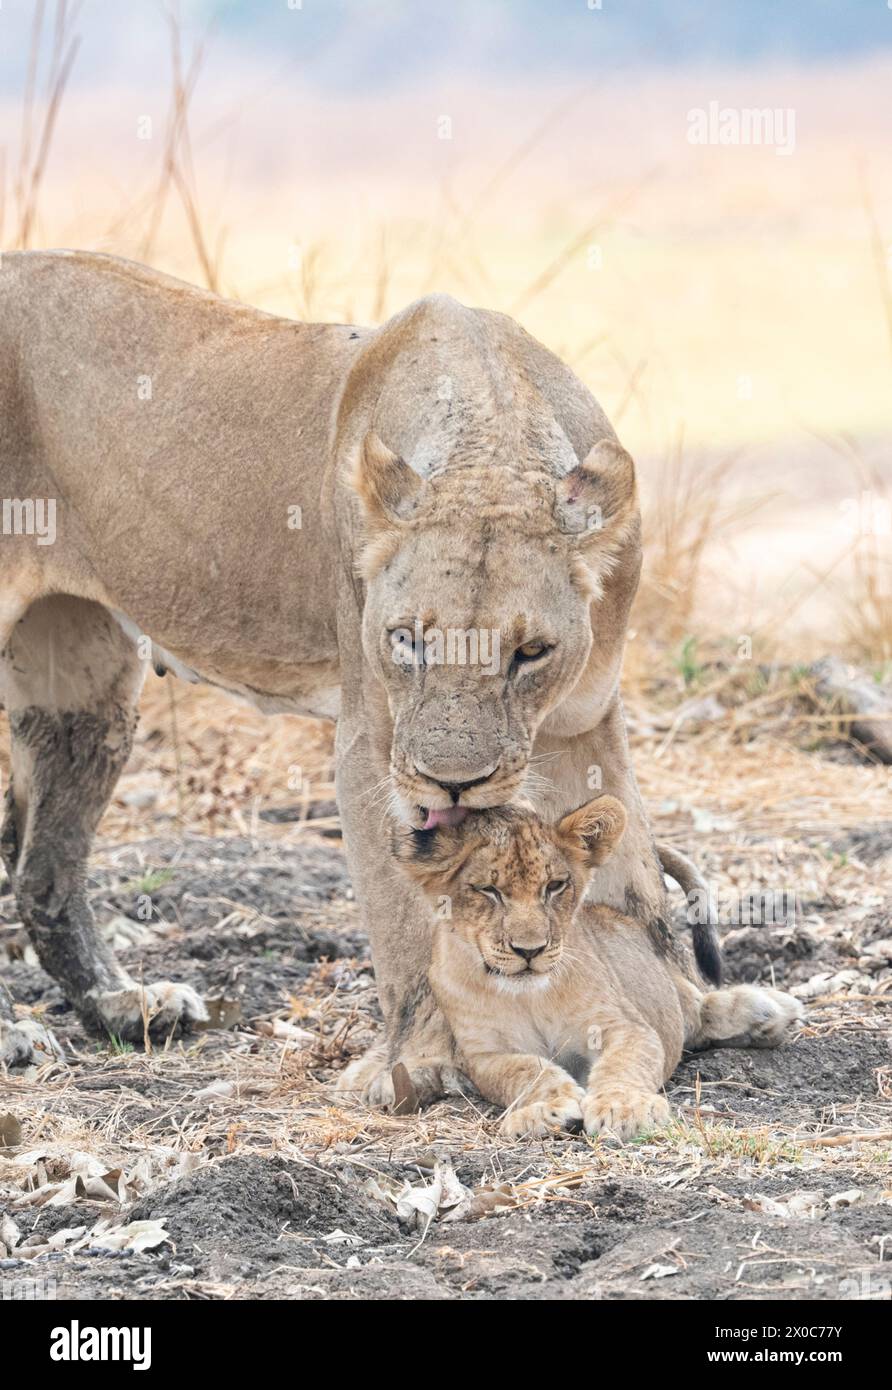 The duo is from Zambia's Hollywood Pride     ZAMBIA ADORABLE images of a lioness showering her little one with affection were captured in South Luangw Stock Photo